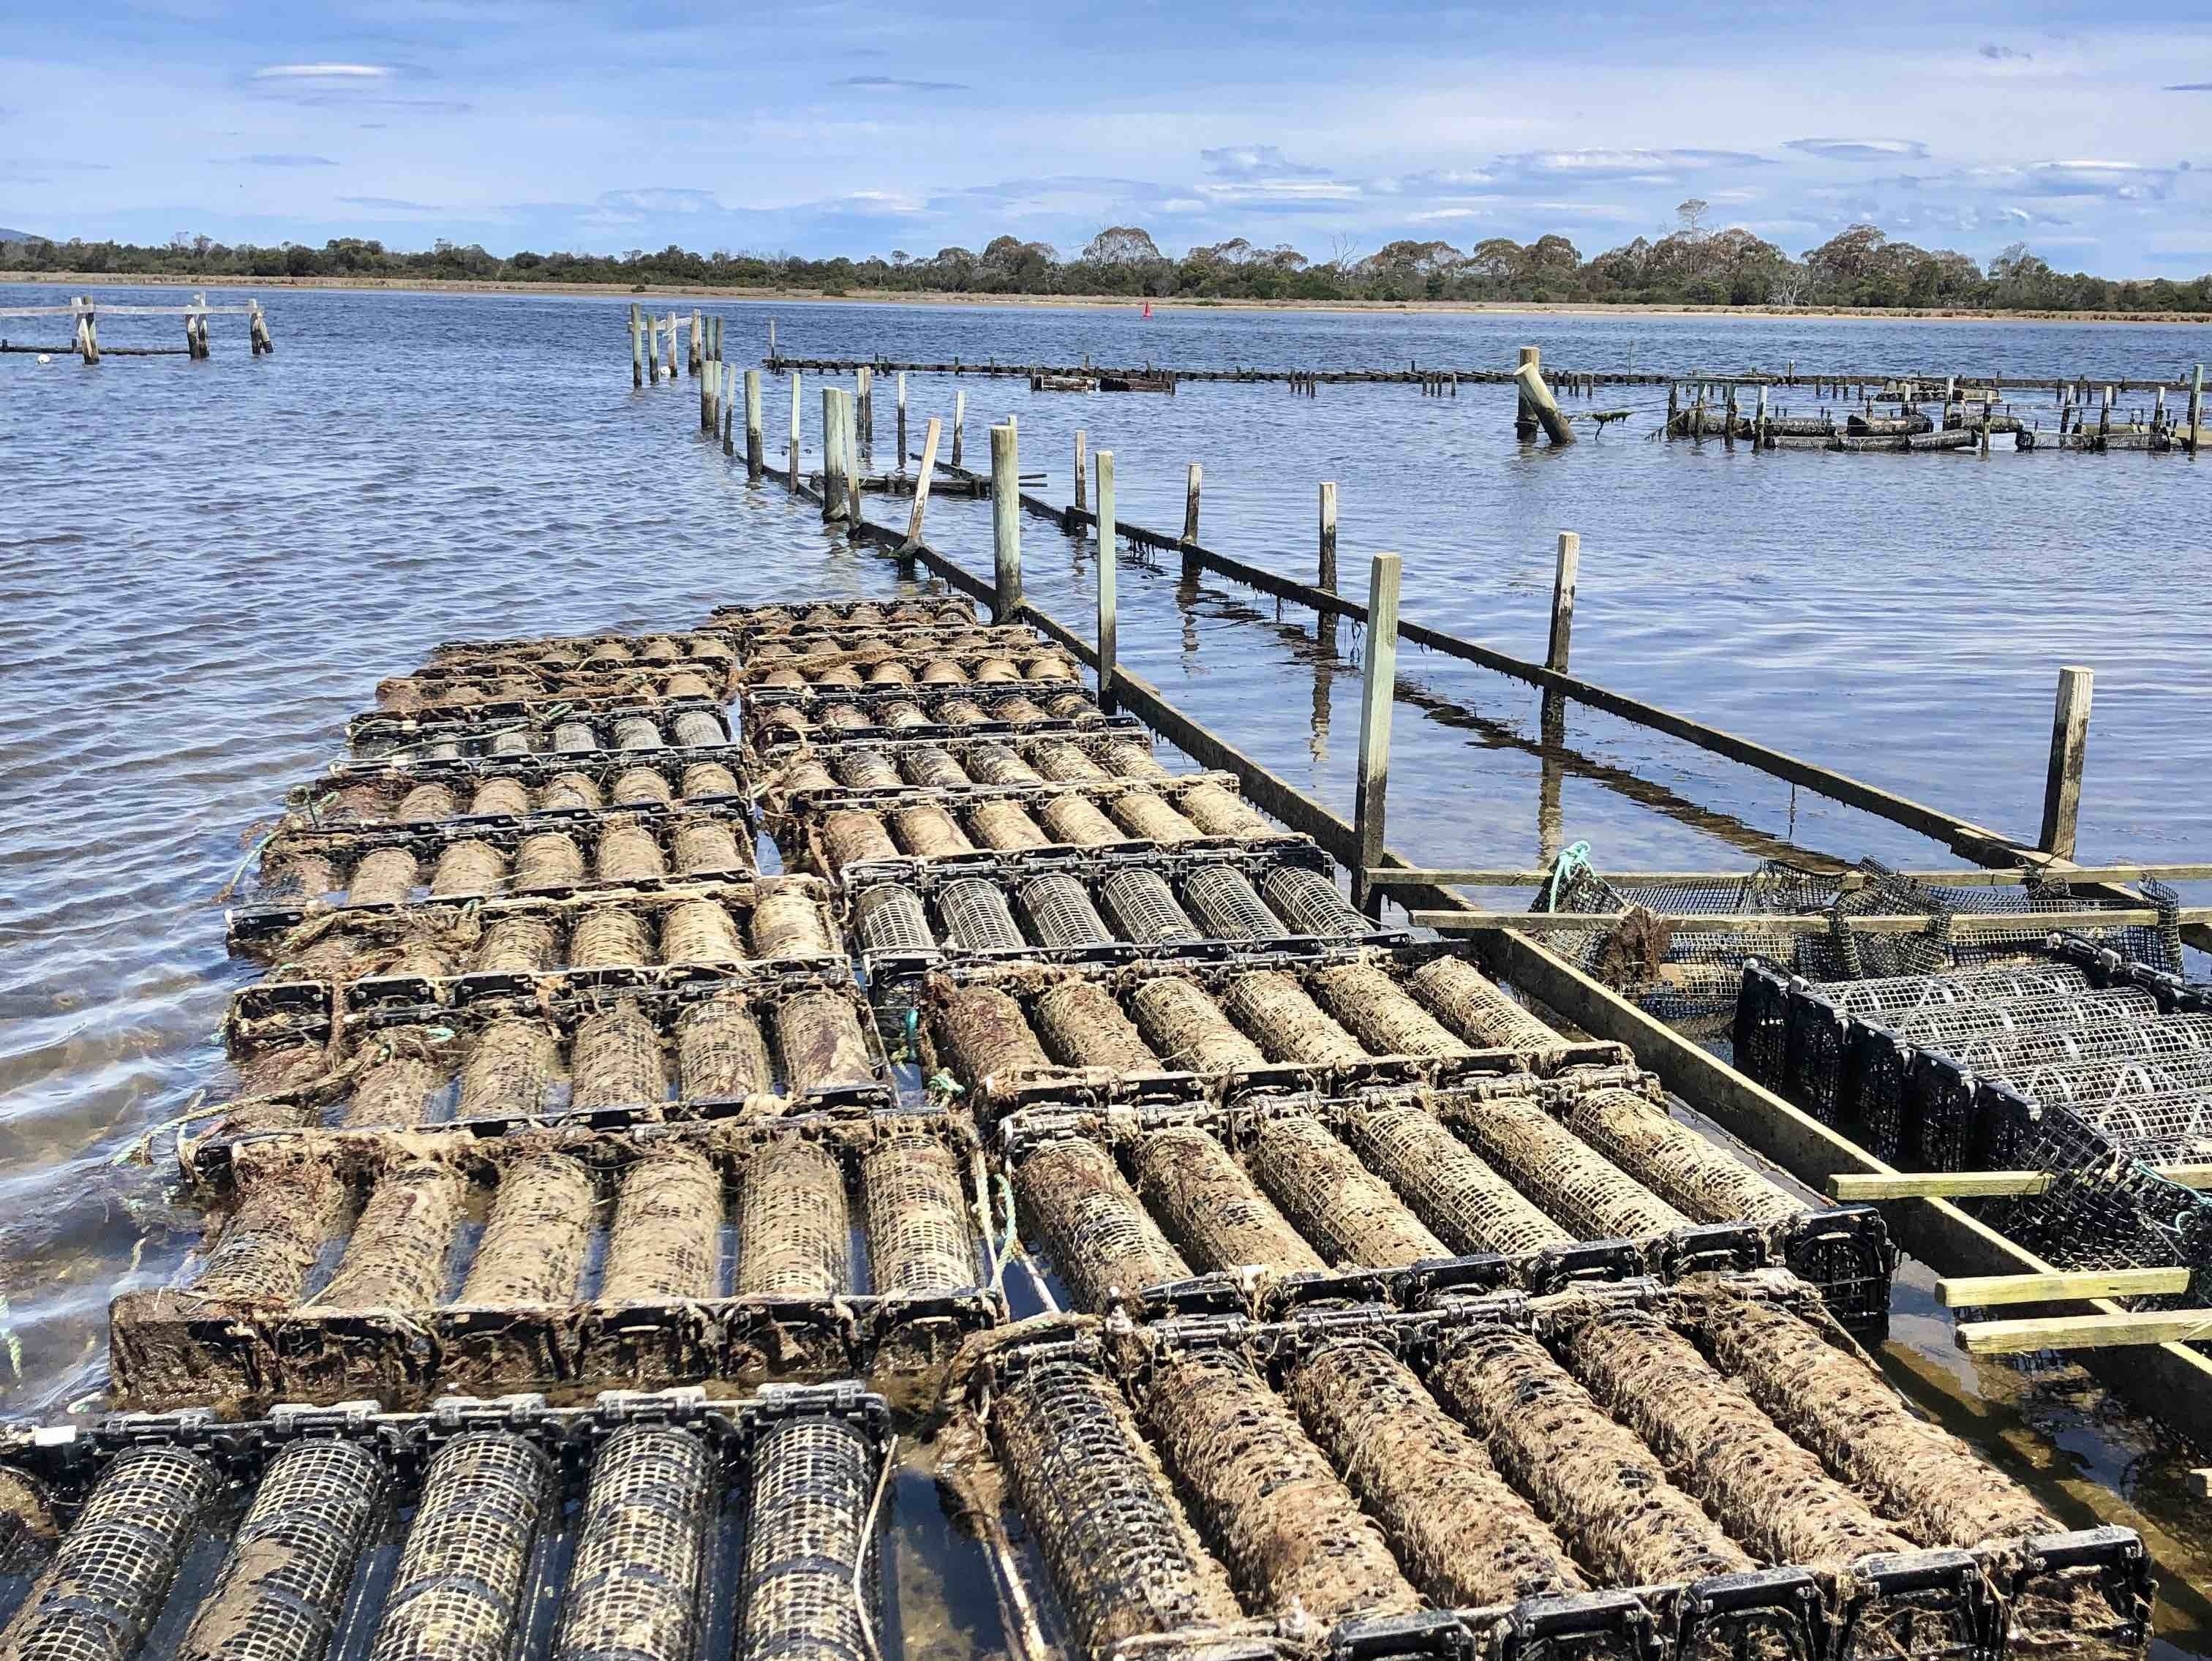 The oyster beds for Freycinet Marine Farm. Their storefront where you can buy them by the dozens are just a couple of miles from where they are “grown”.